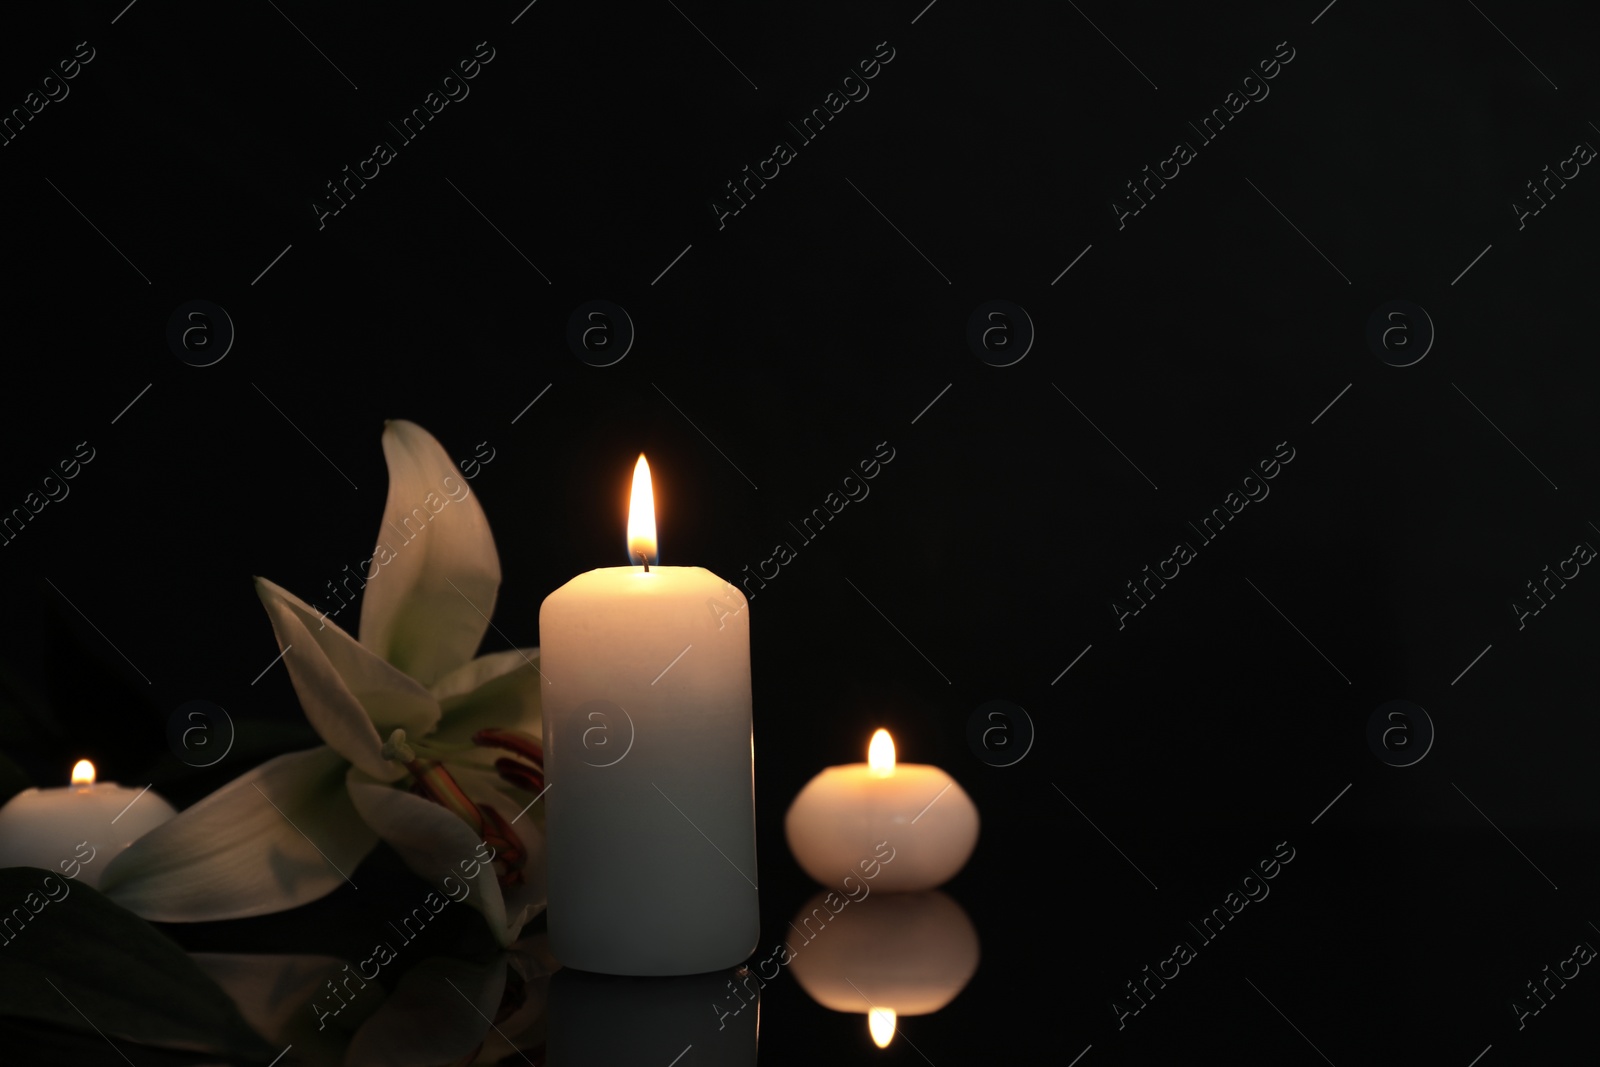 Photo of White lily and burning candles on black mirror surface in darkness, space for text. Funeral symbols